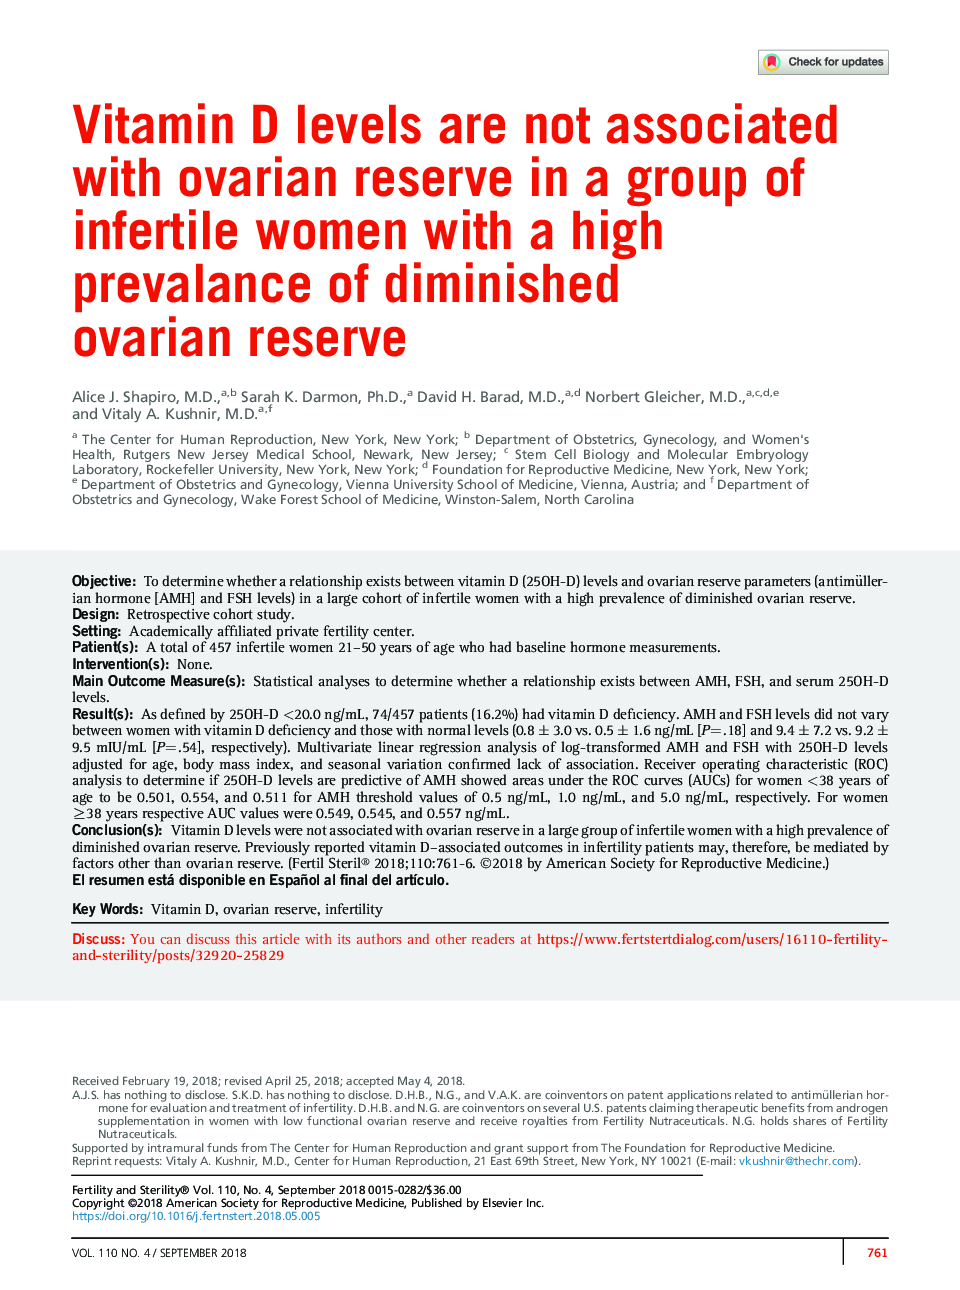 Vitamin D levels are not associated with ovarian reserve in a group of infertile women with a high prevalance of diminished ovarian reserve